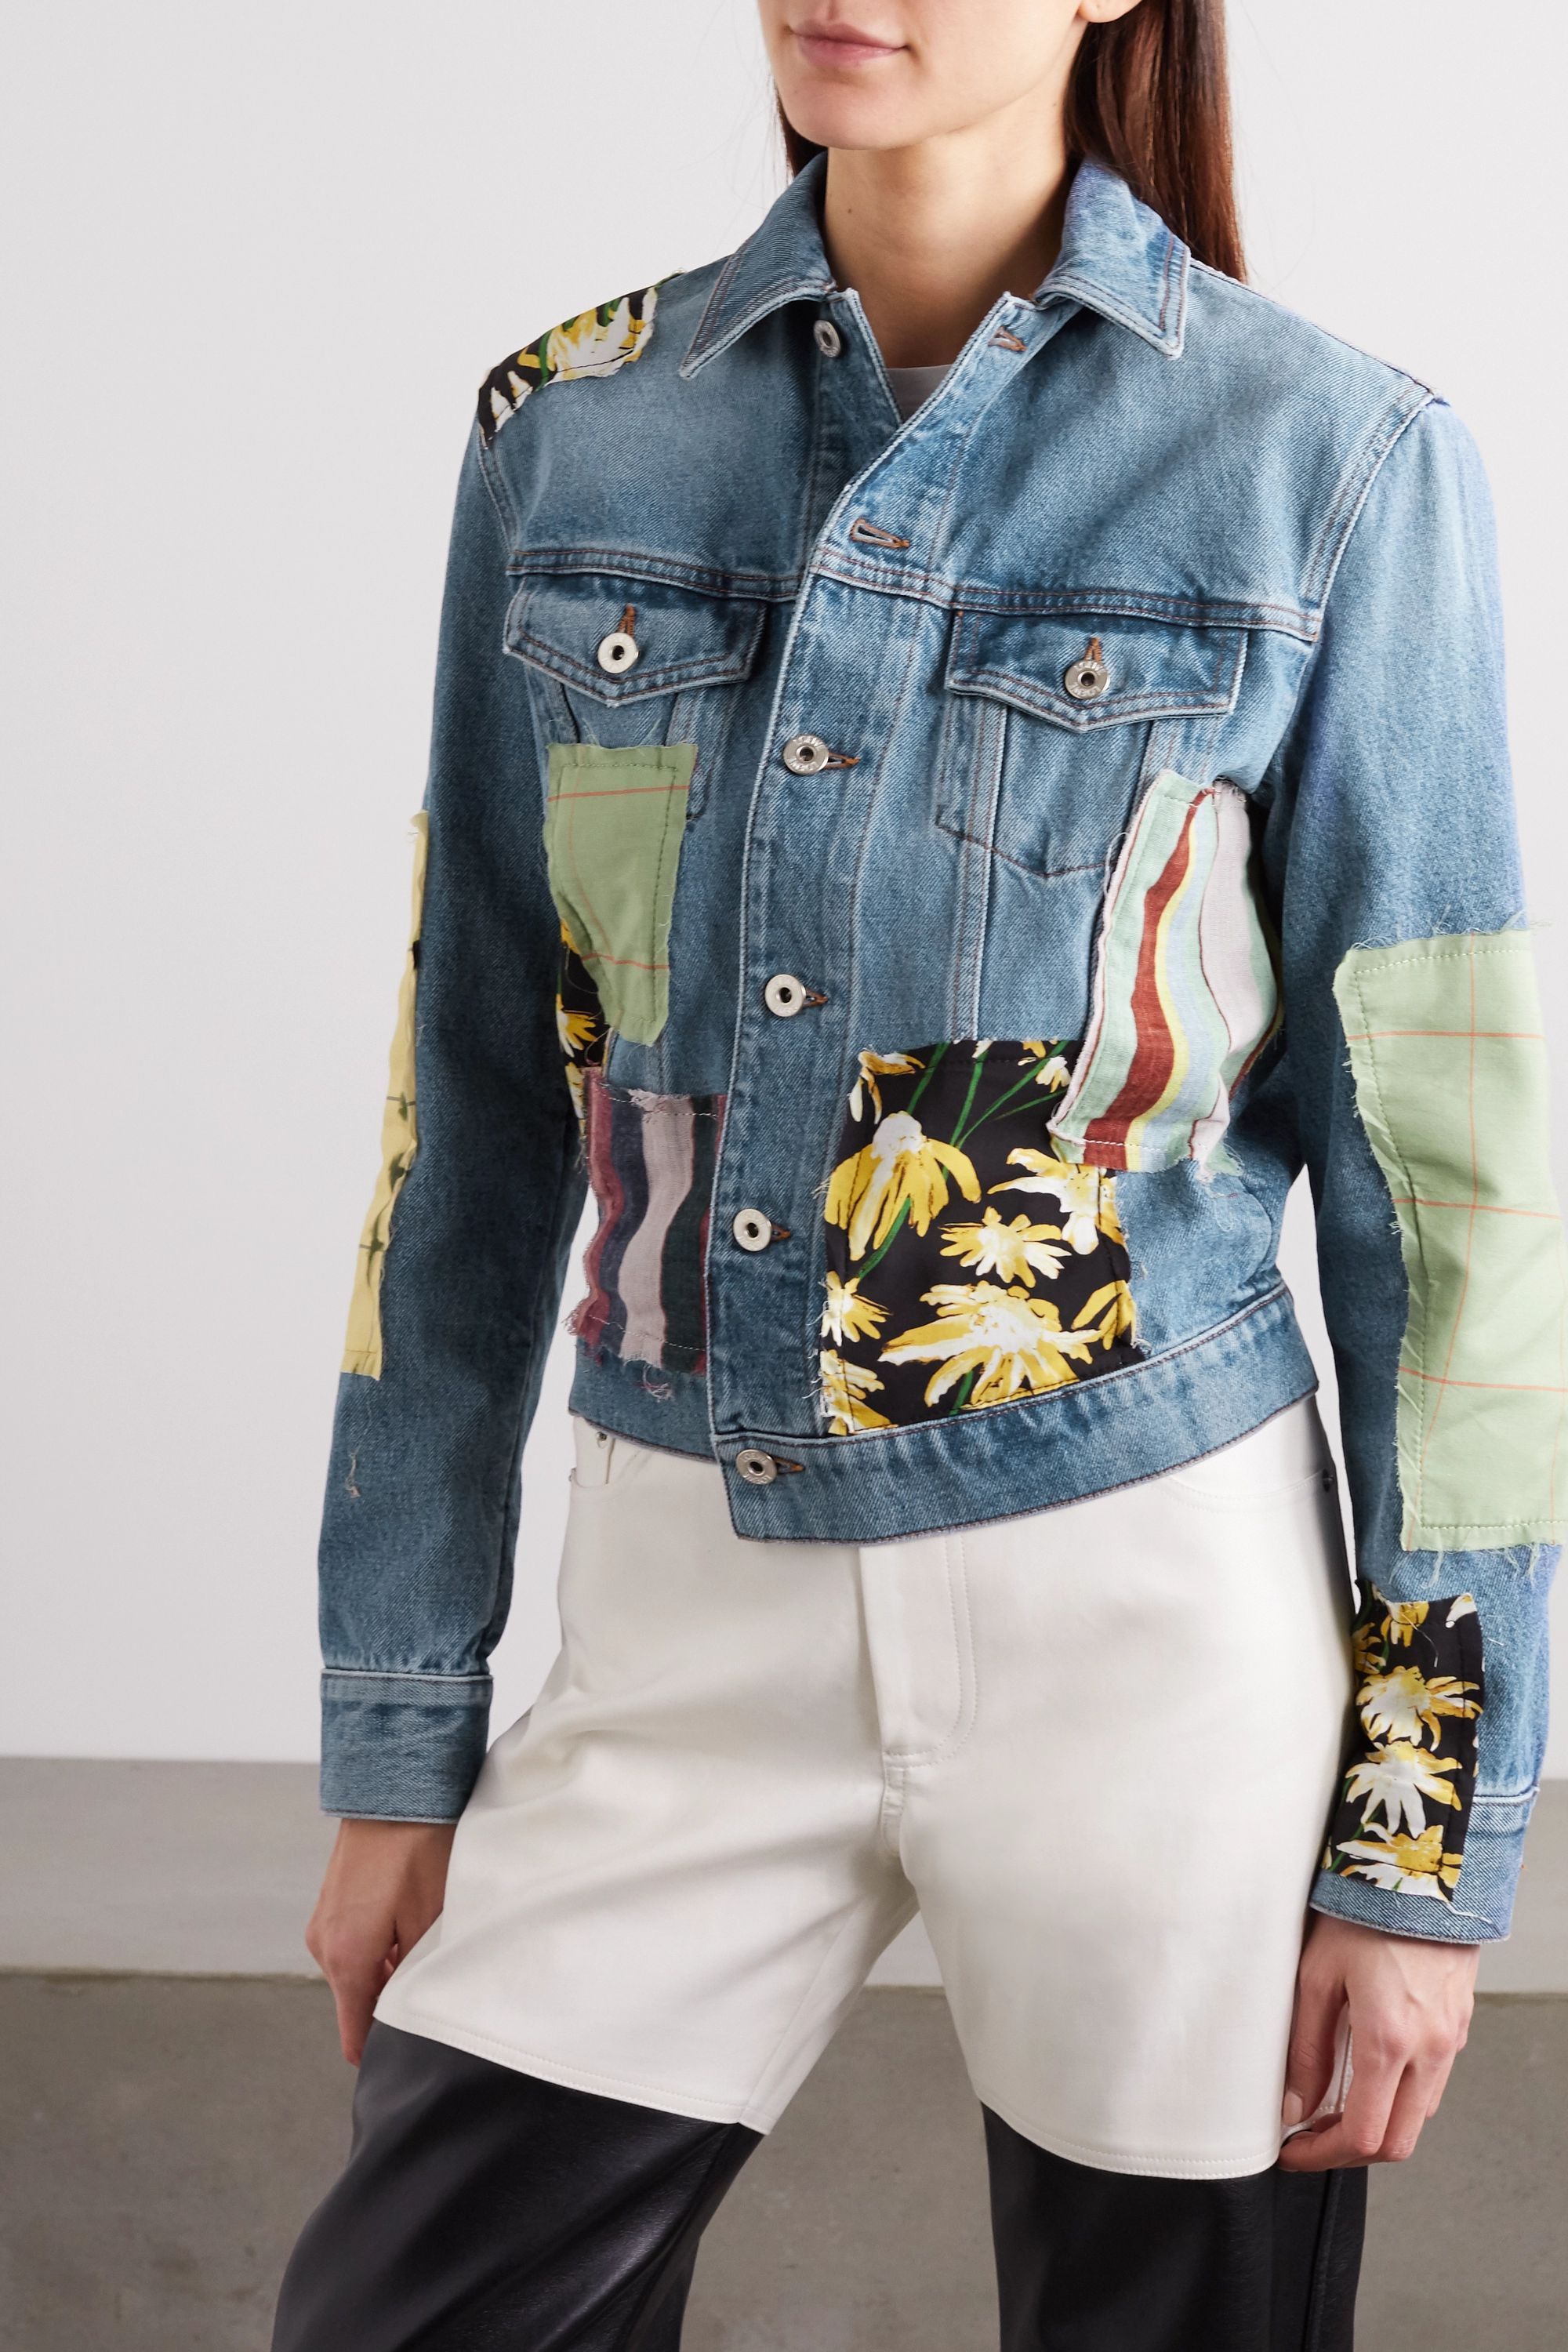 Cute Denim Jacket Outfits for Women 